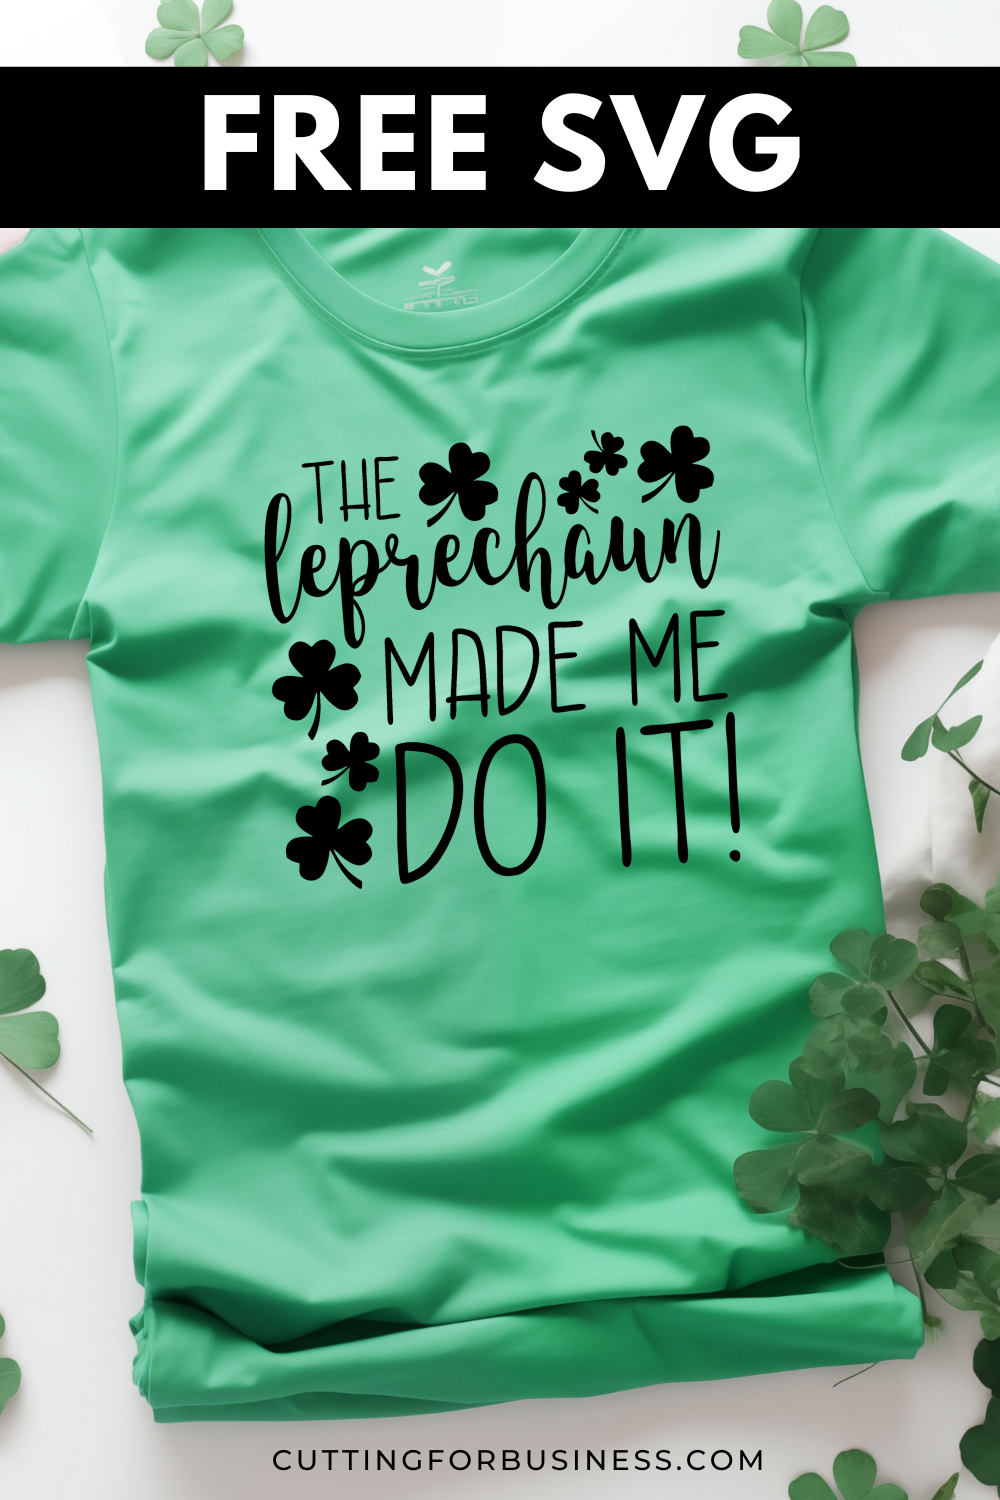 Free St. Patrick's Day SVG - The Leprechaun Made Me Do It - cuttingforbusiness.com